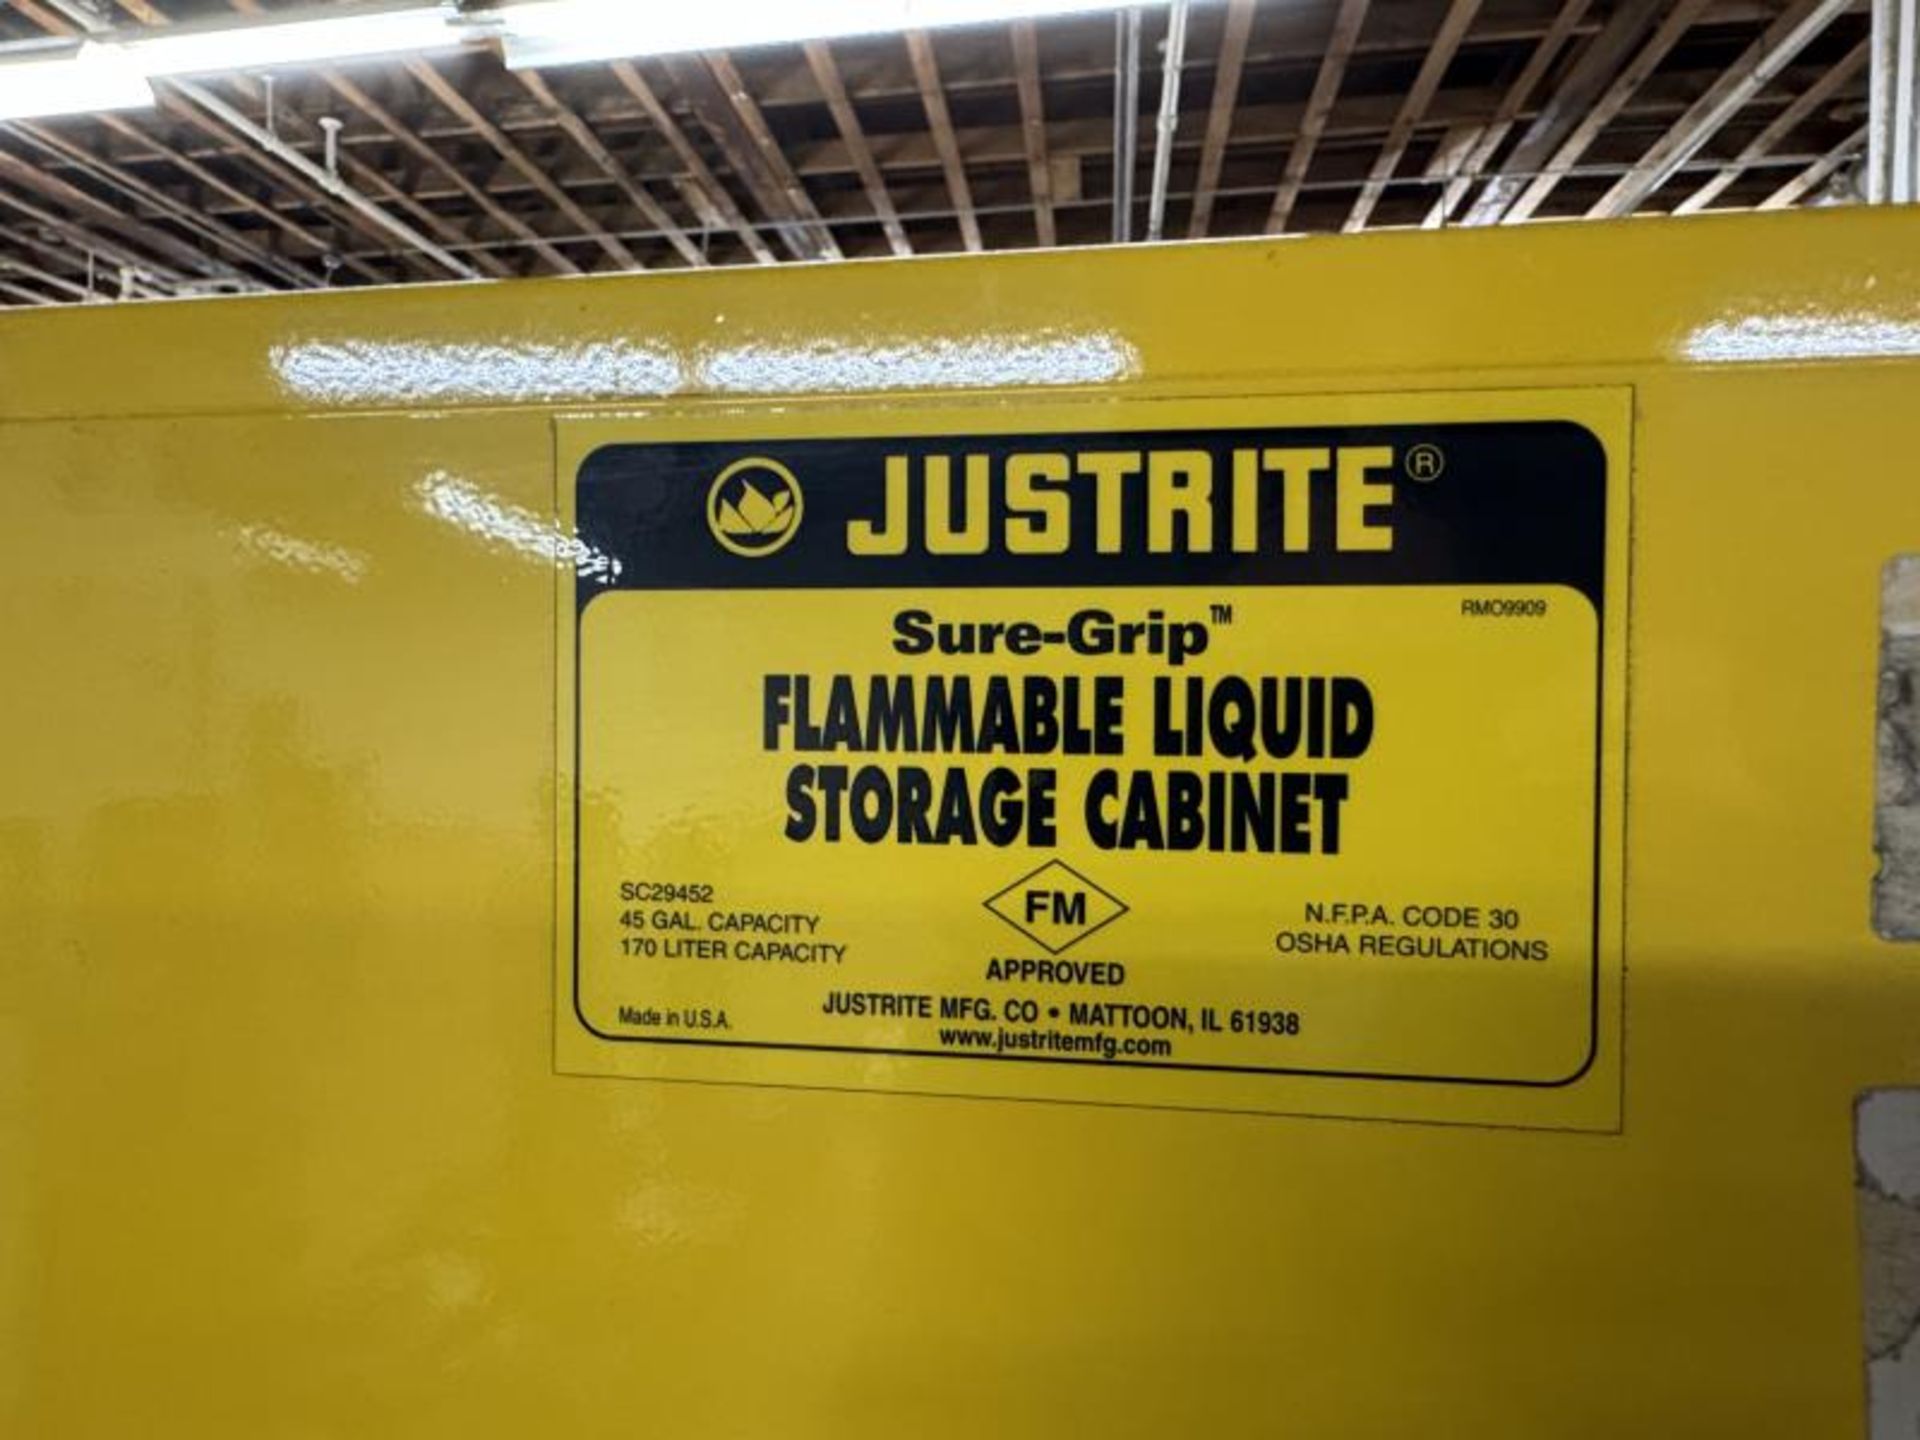 Justrite Flammable Liquid Storage Cabinet 43" Wide x 18" Deep x 65" Tall - Image 3 of 7